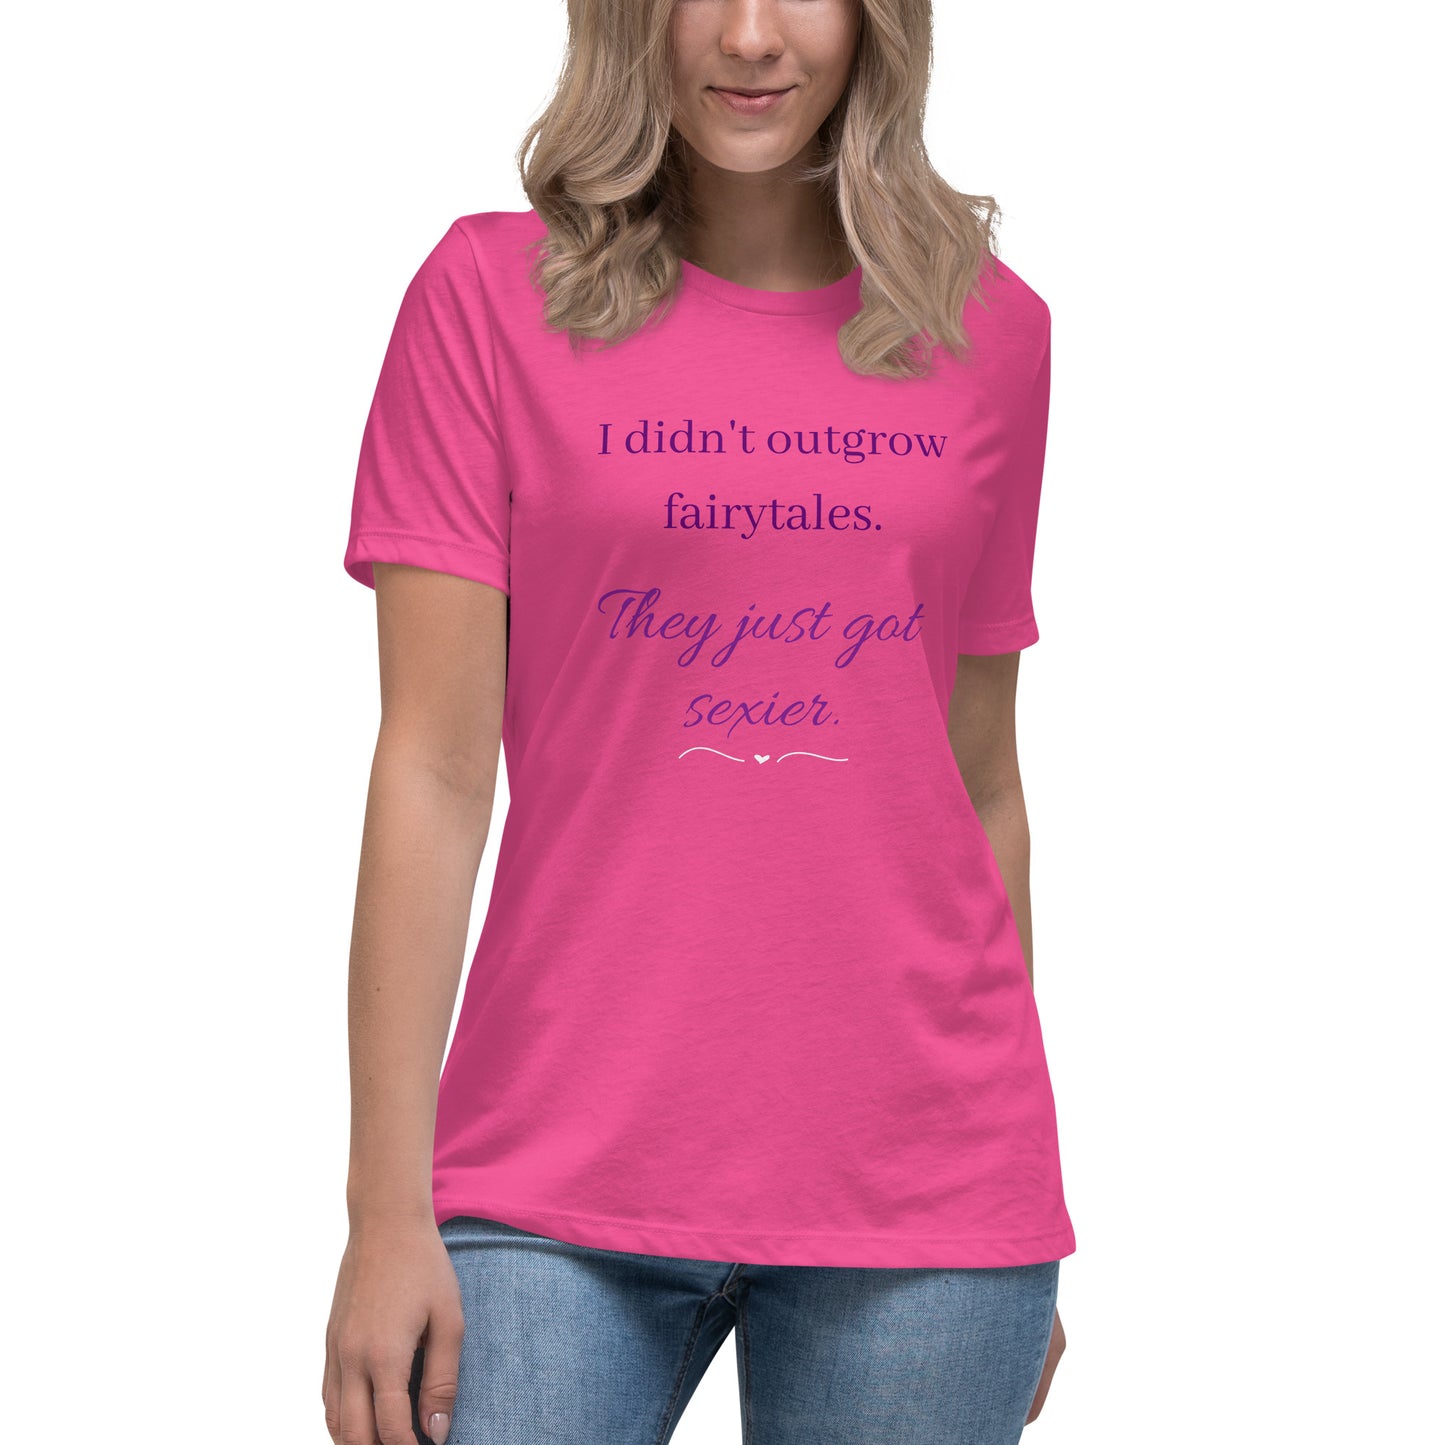 Women's Relaxed T-Shirt I didn't outgrow fairy tales